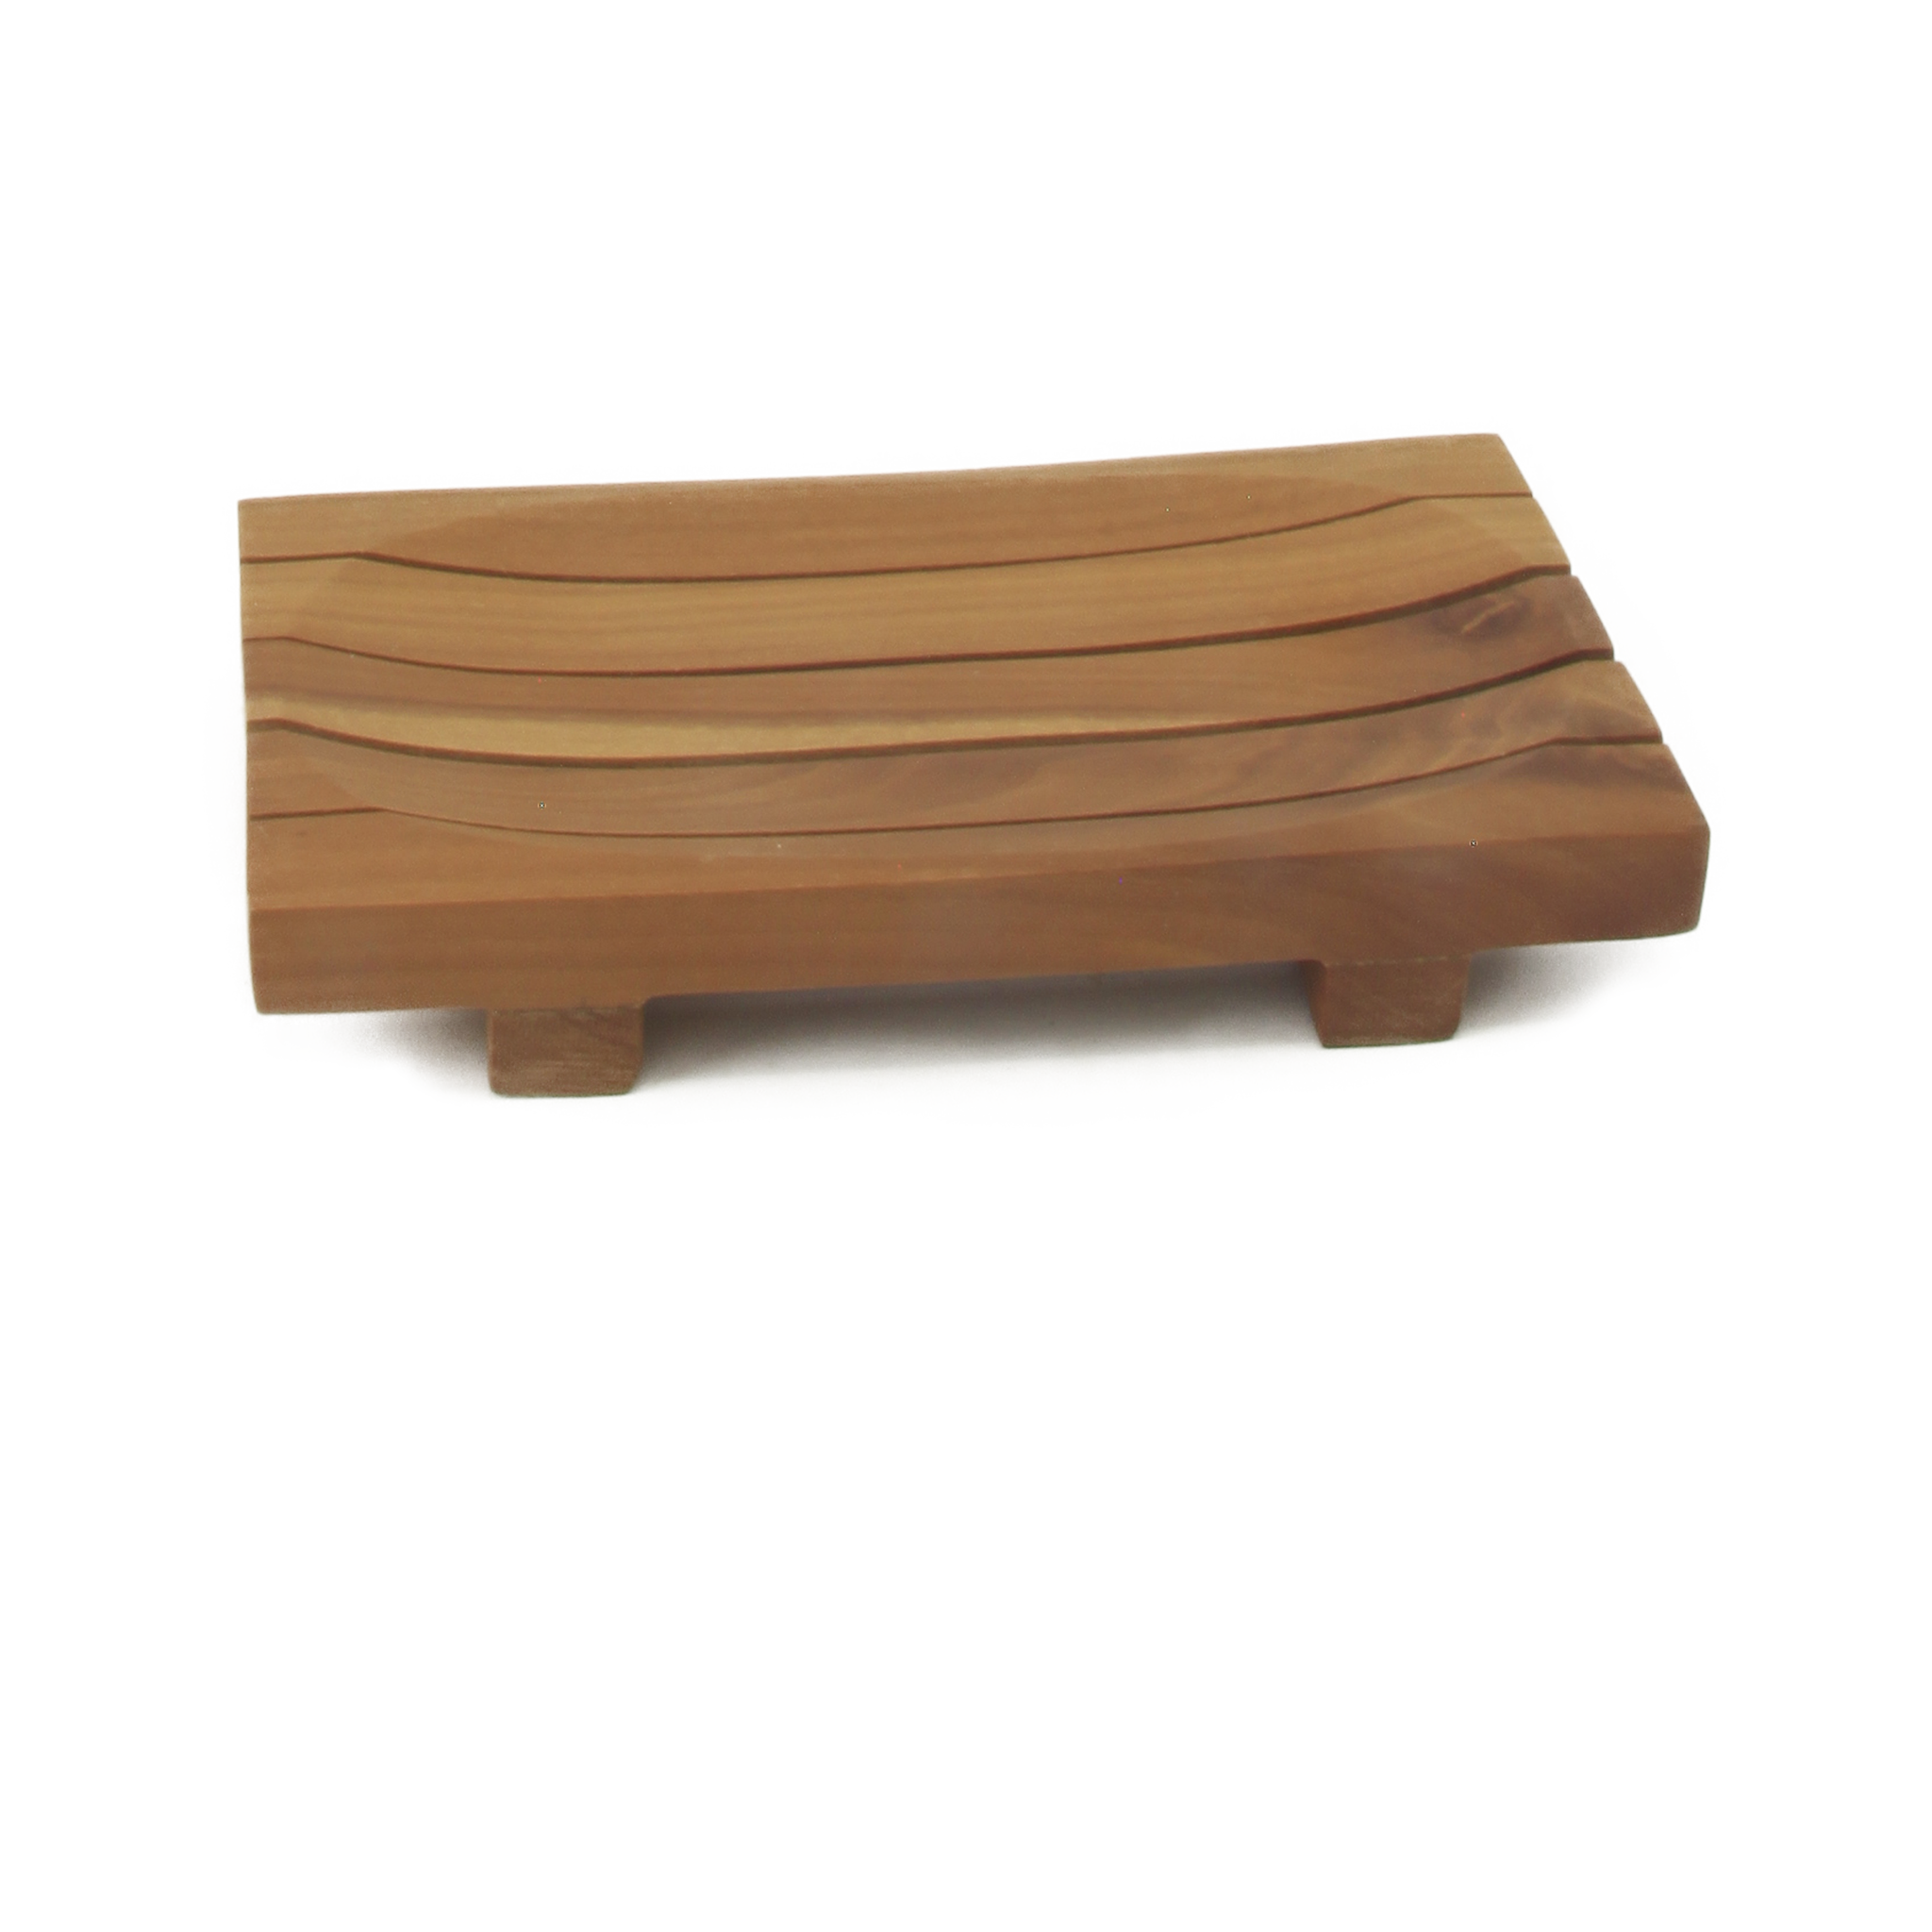 Soapdish Wooden